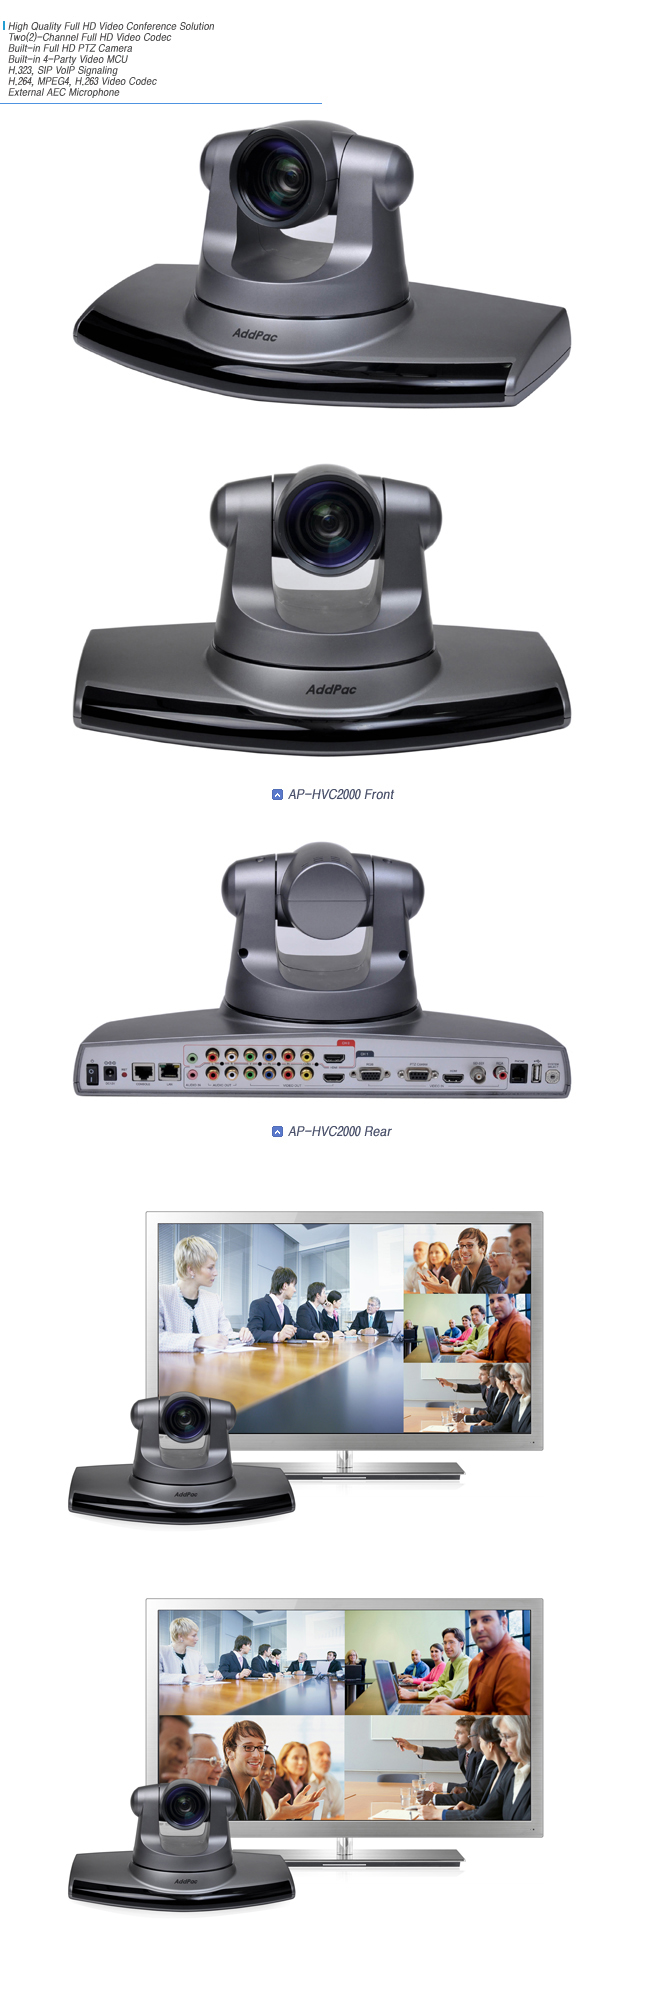 AP-HVC2000 HD Video Conference  | AddPac